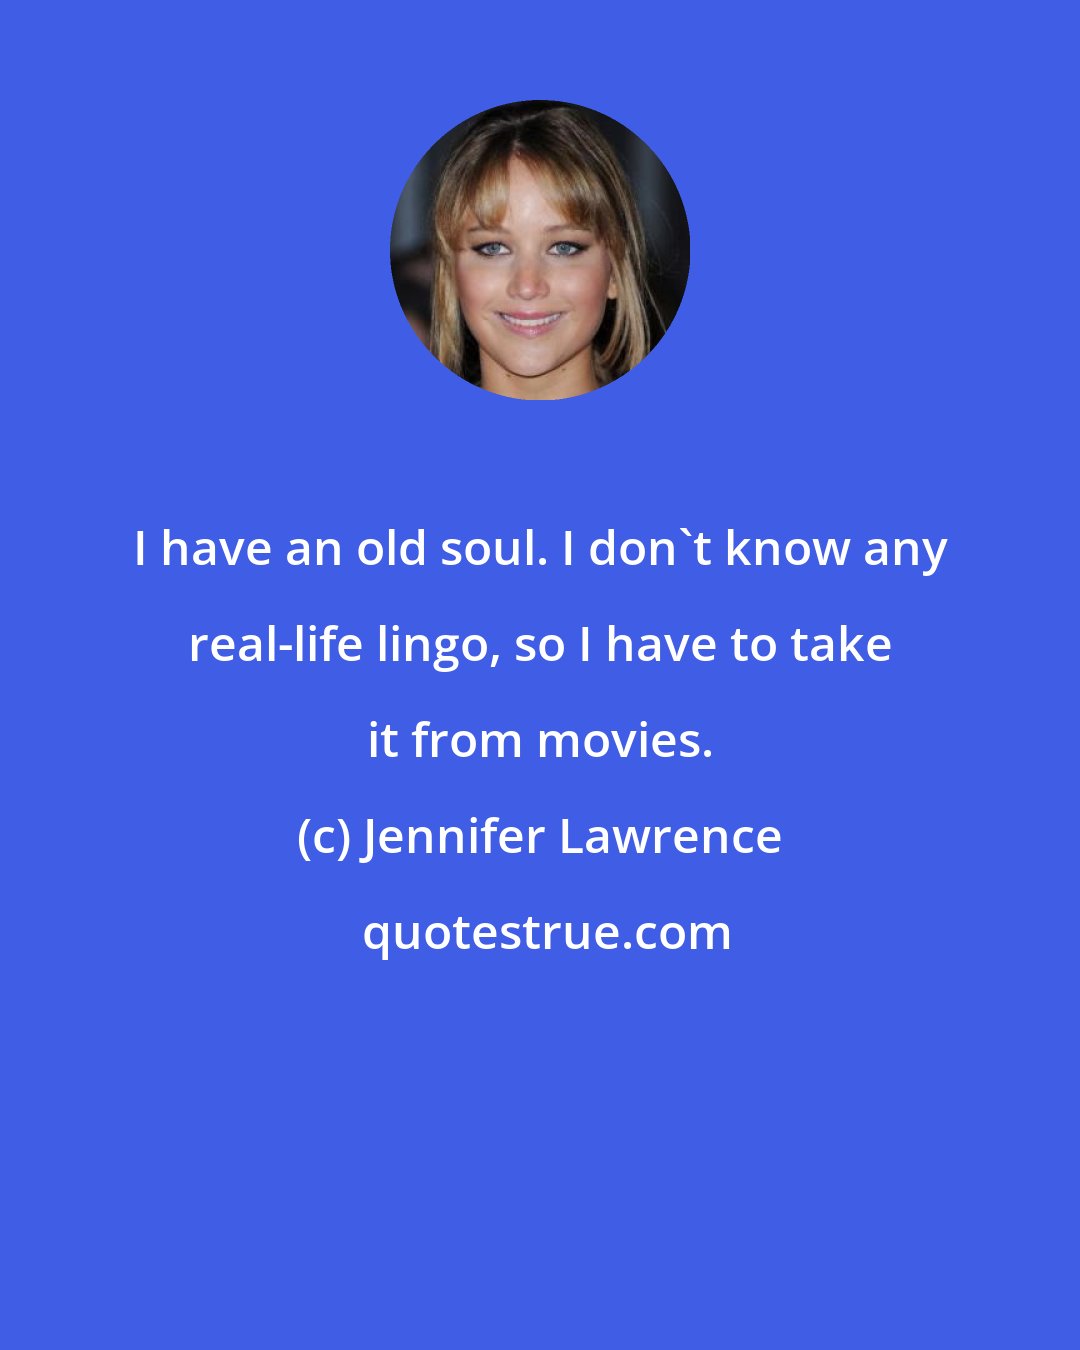 Jennifer Lawrence: I have an old soul. I don't know any real-life lingo, so I have to take it from movies.